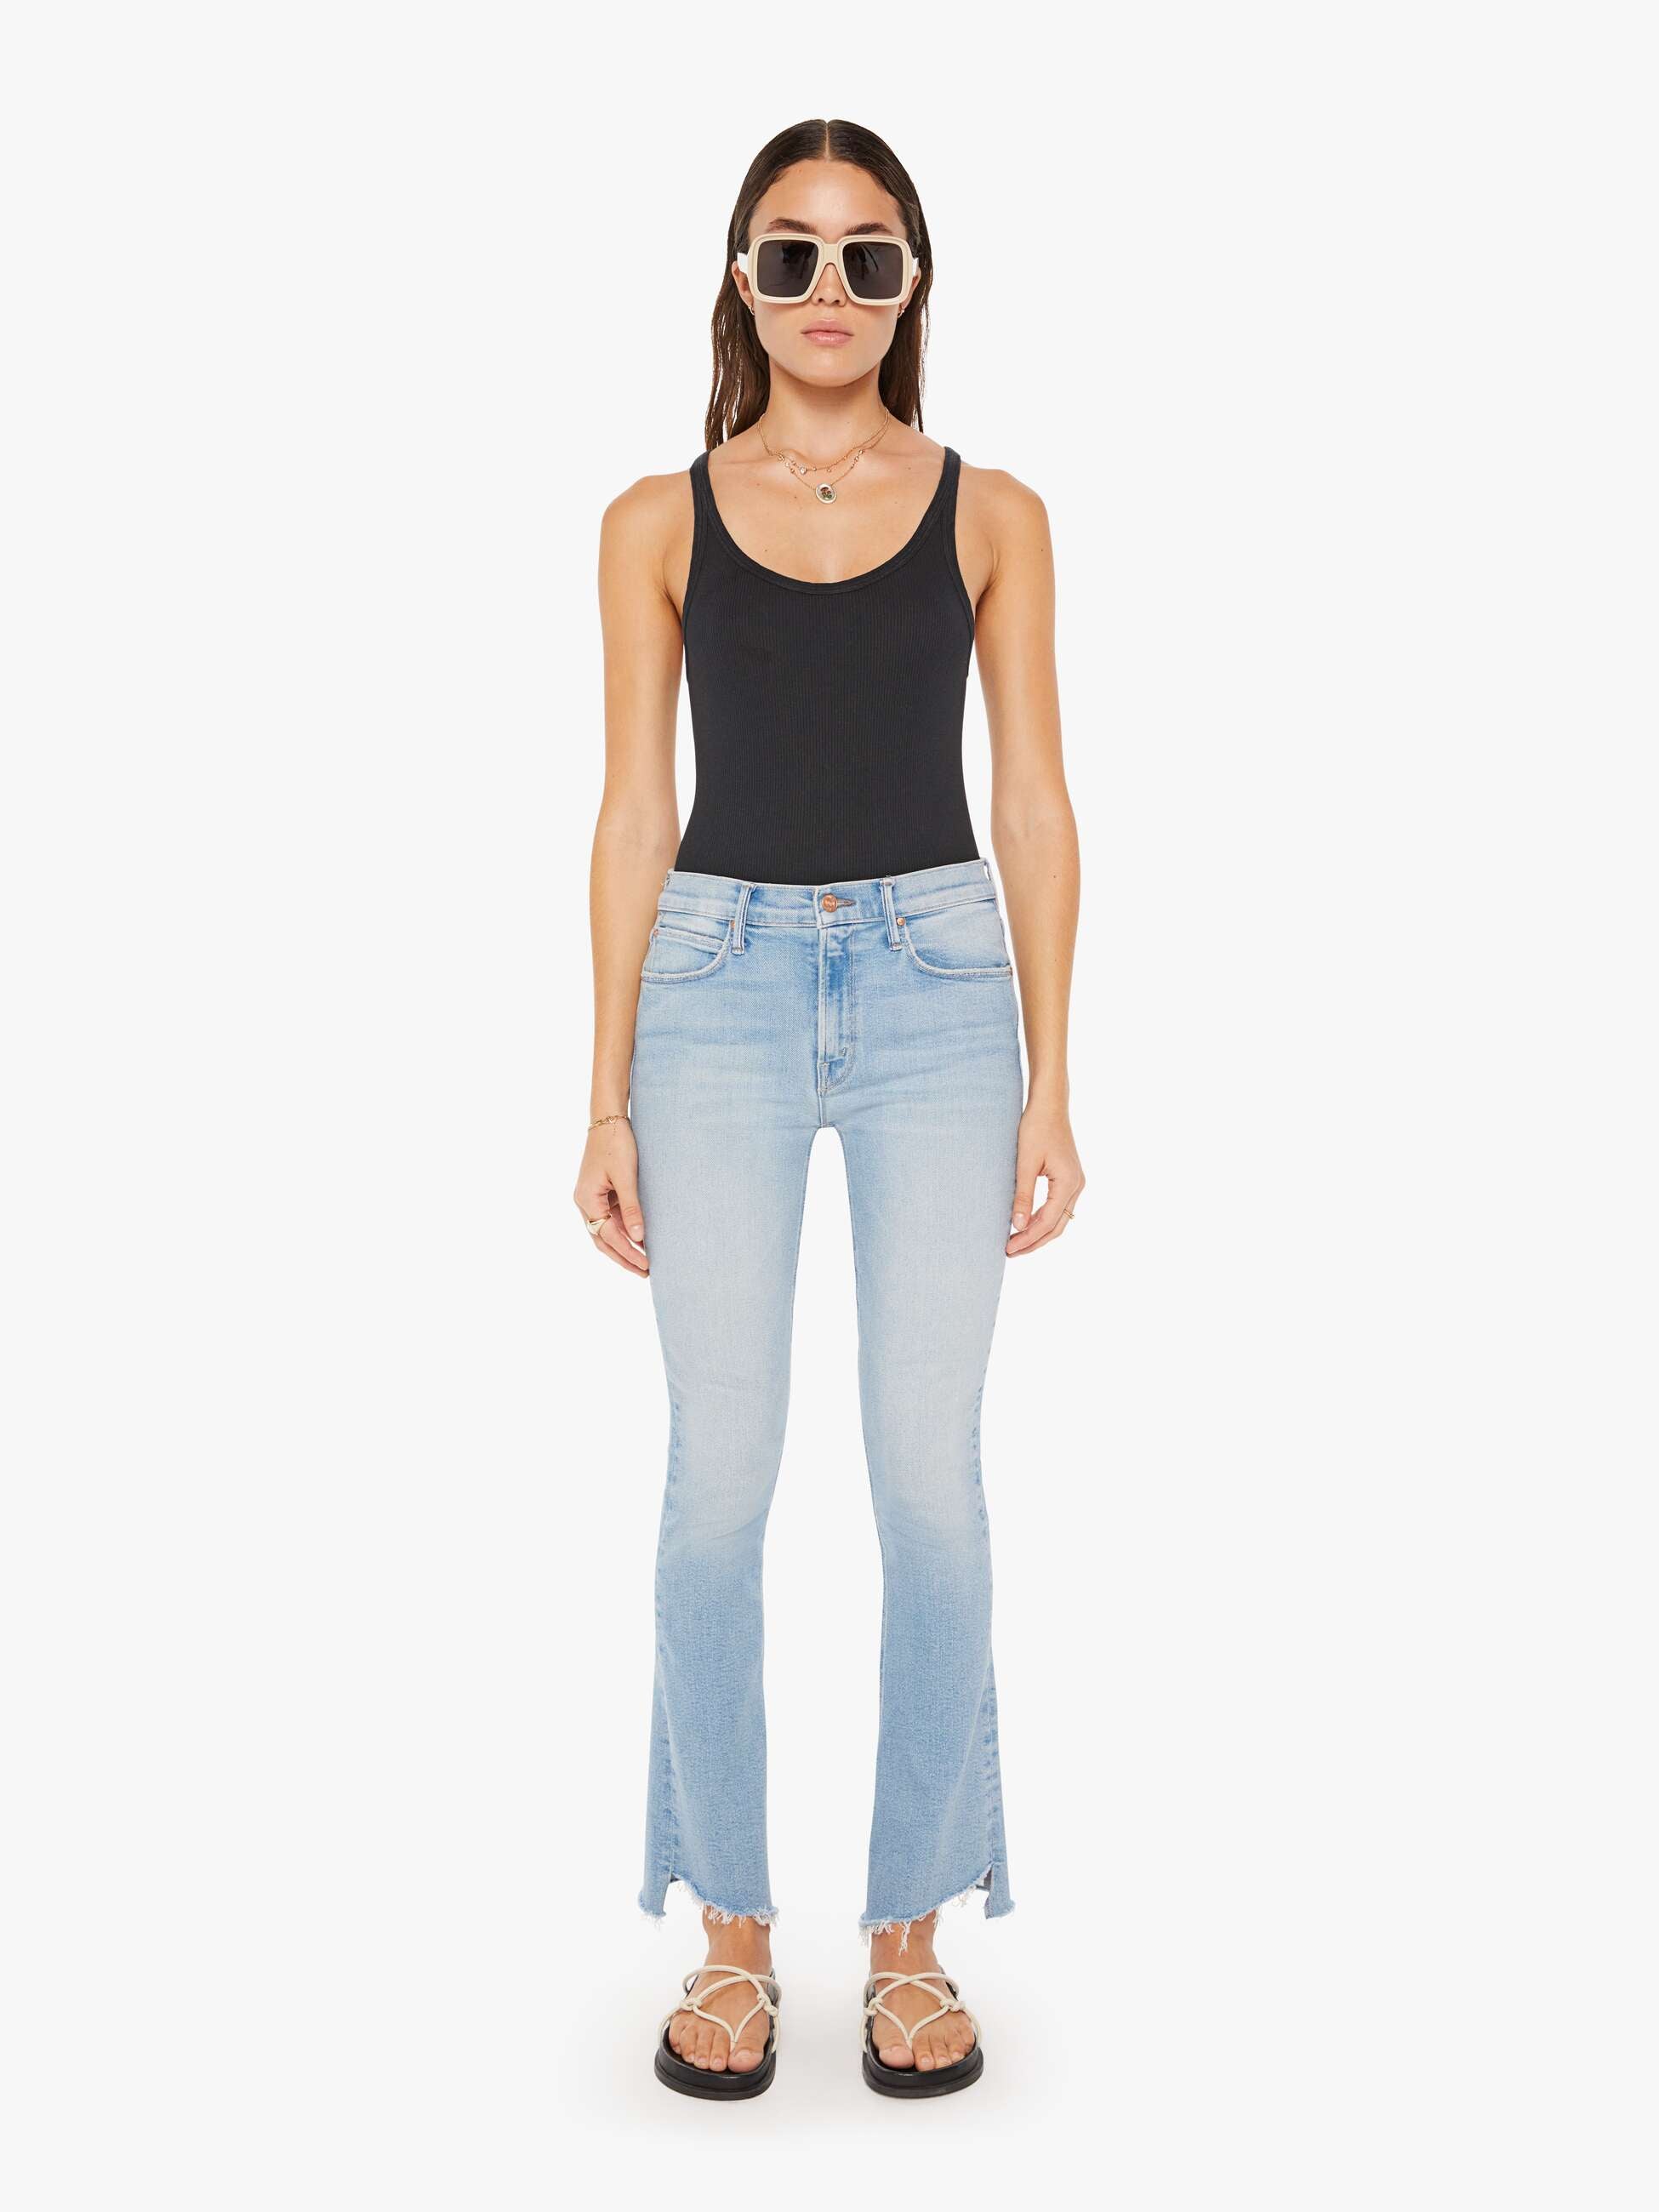 MOTHER Super Cruiser Jeans Review: TRULY Flared Denim  Womens flare jeans,  Cute summer outfits, Tank top outfits